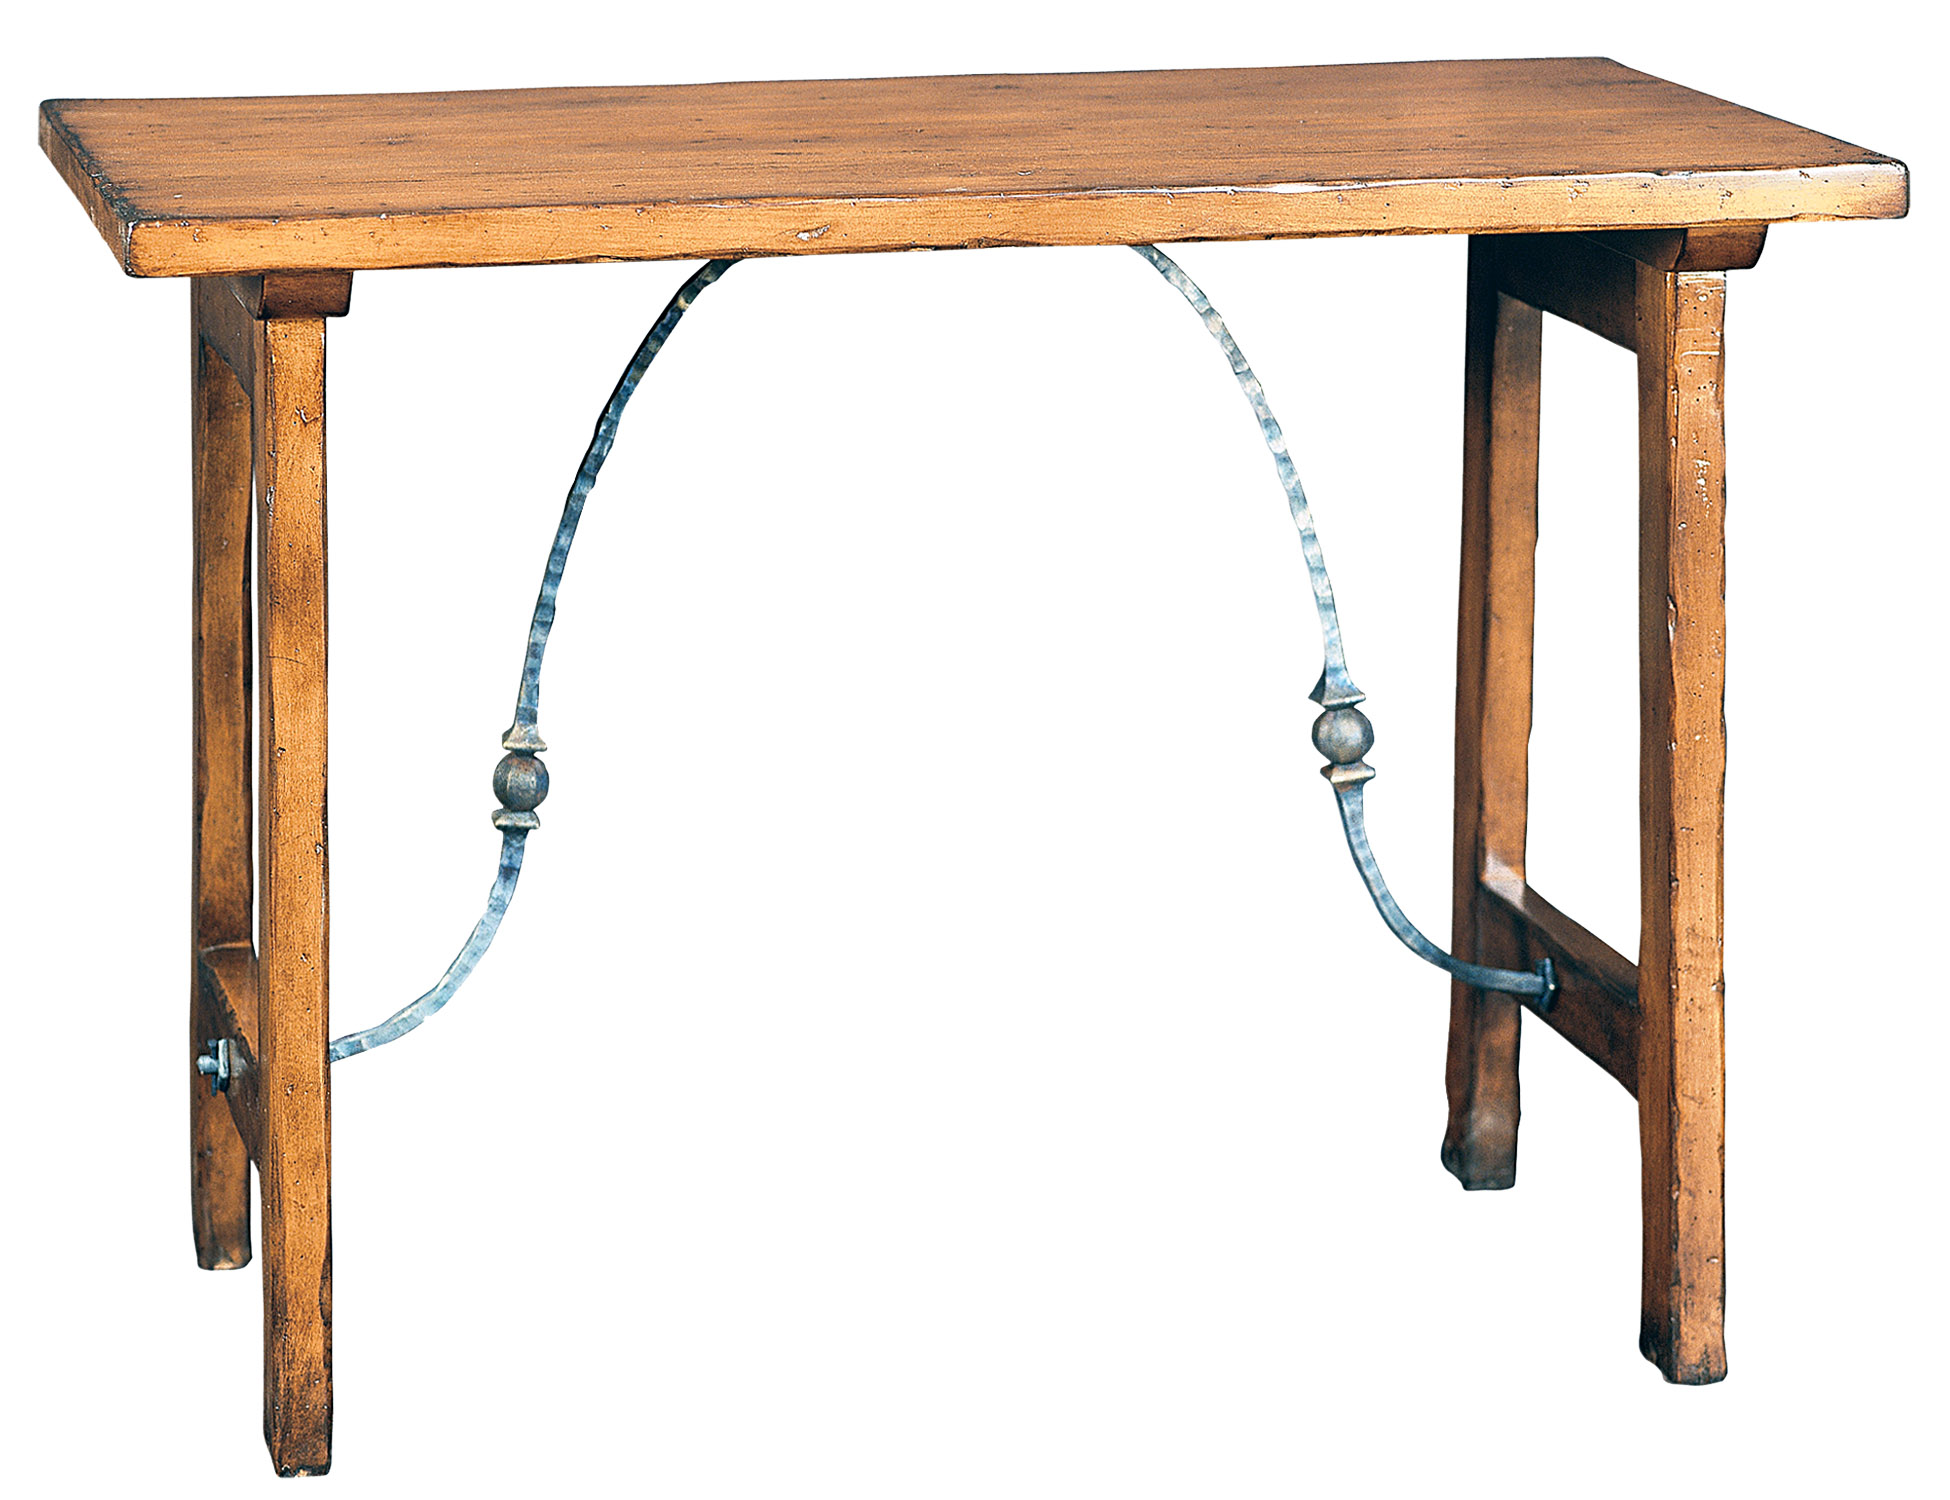 Morava transitional rustic sofa console table with metal decorative stretcher by Woodland Furniture in Idaho Falls